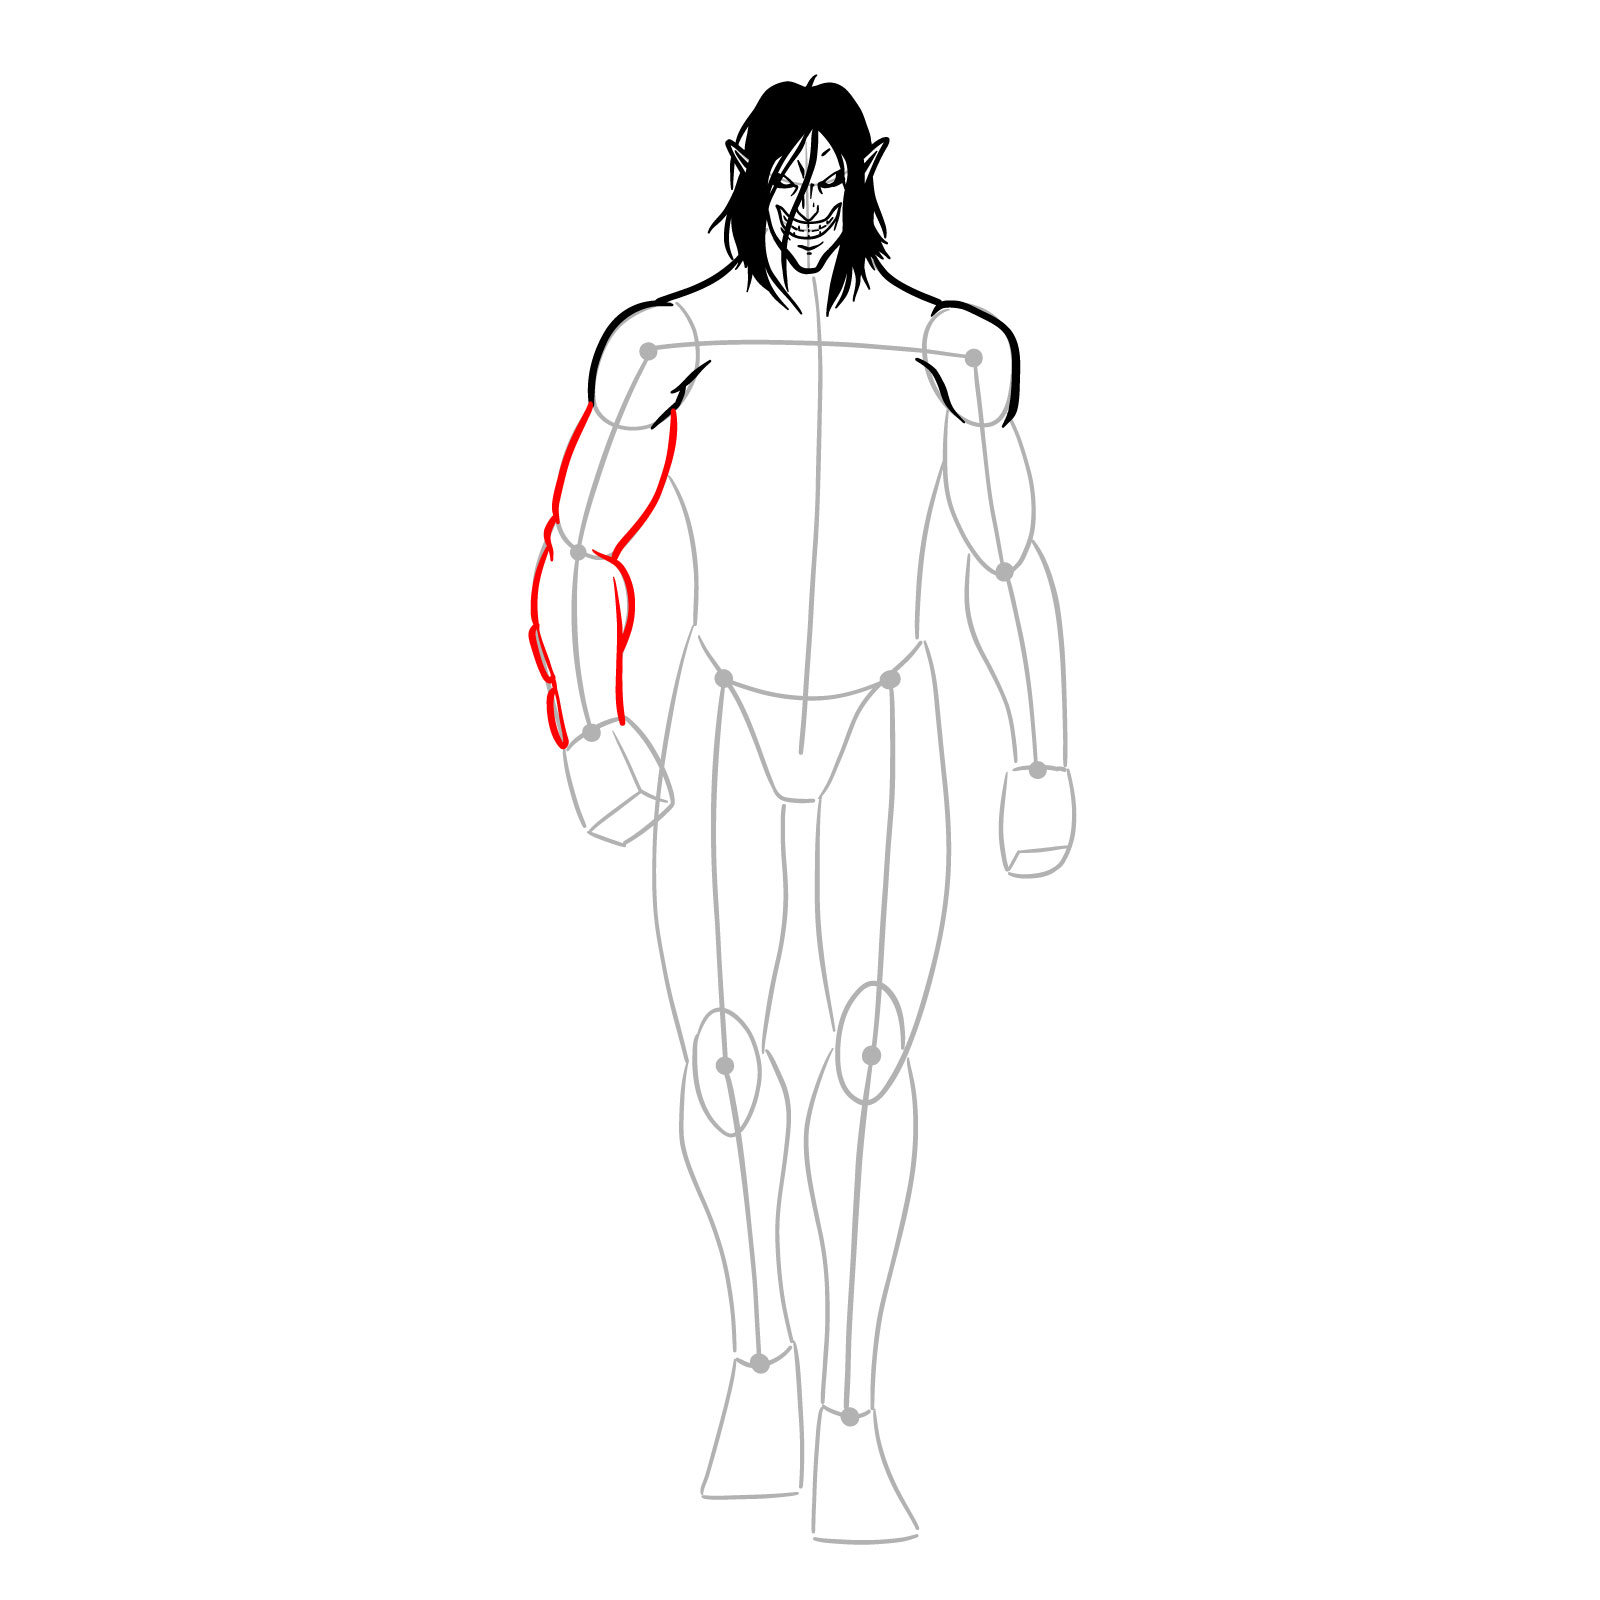 How to draw Eren Jaeger's Titan form full body - step 12